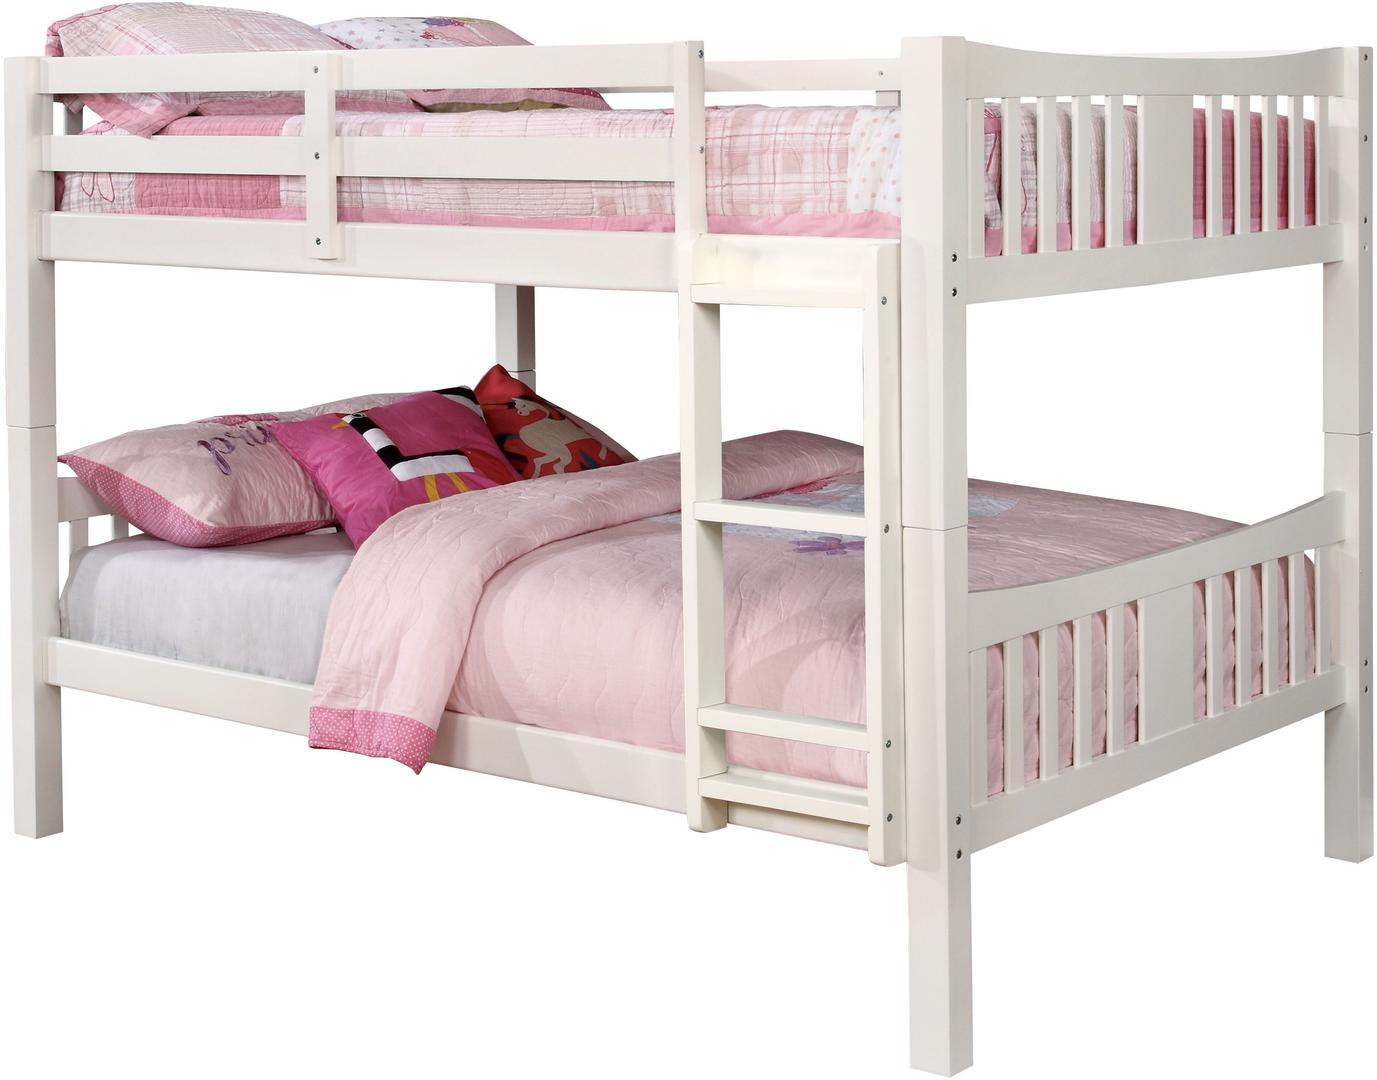 Transitional Bunk Bed CAMERON CM-BK929F-WH CM-BK929F-WH-BED in White 